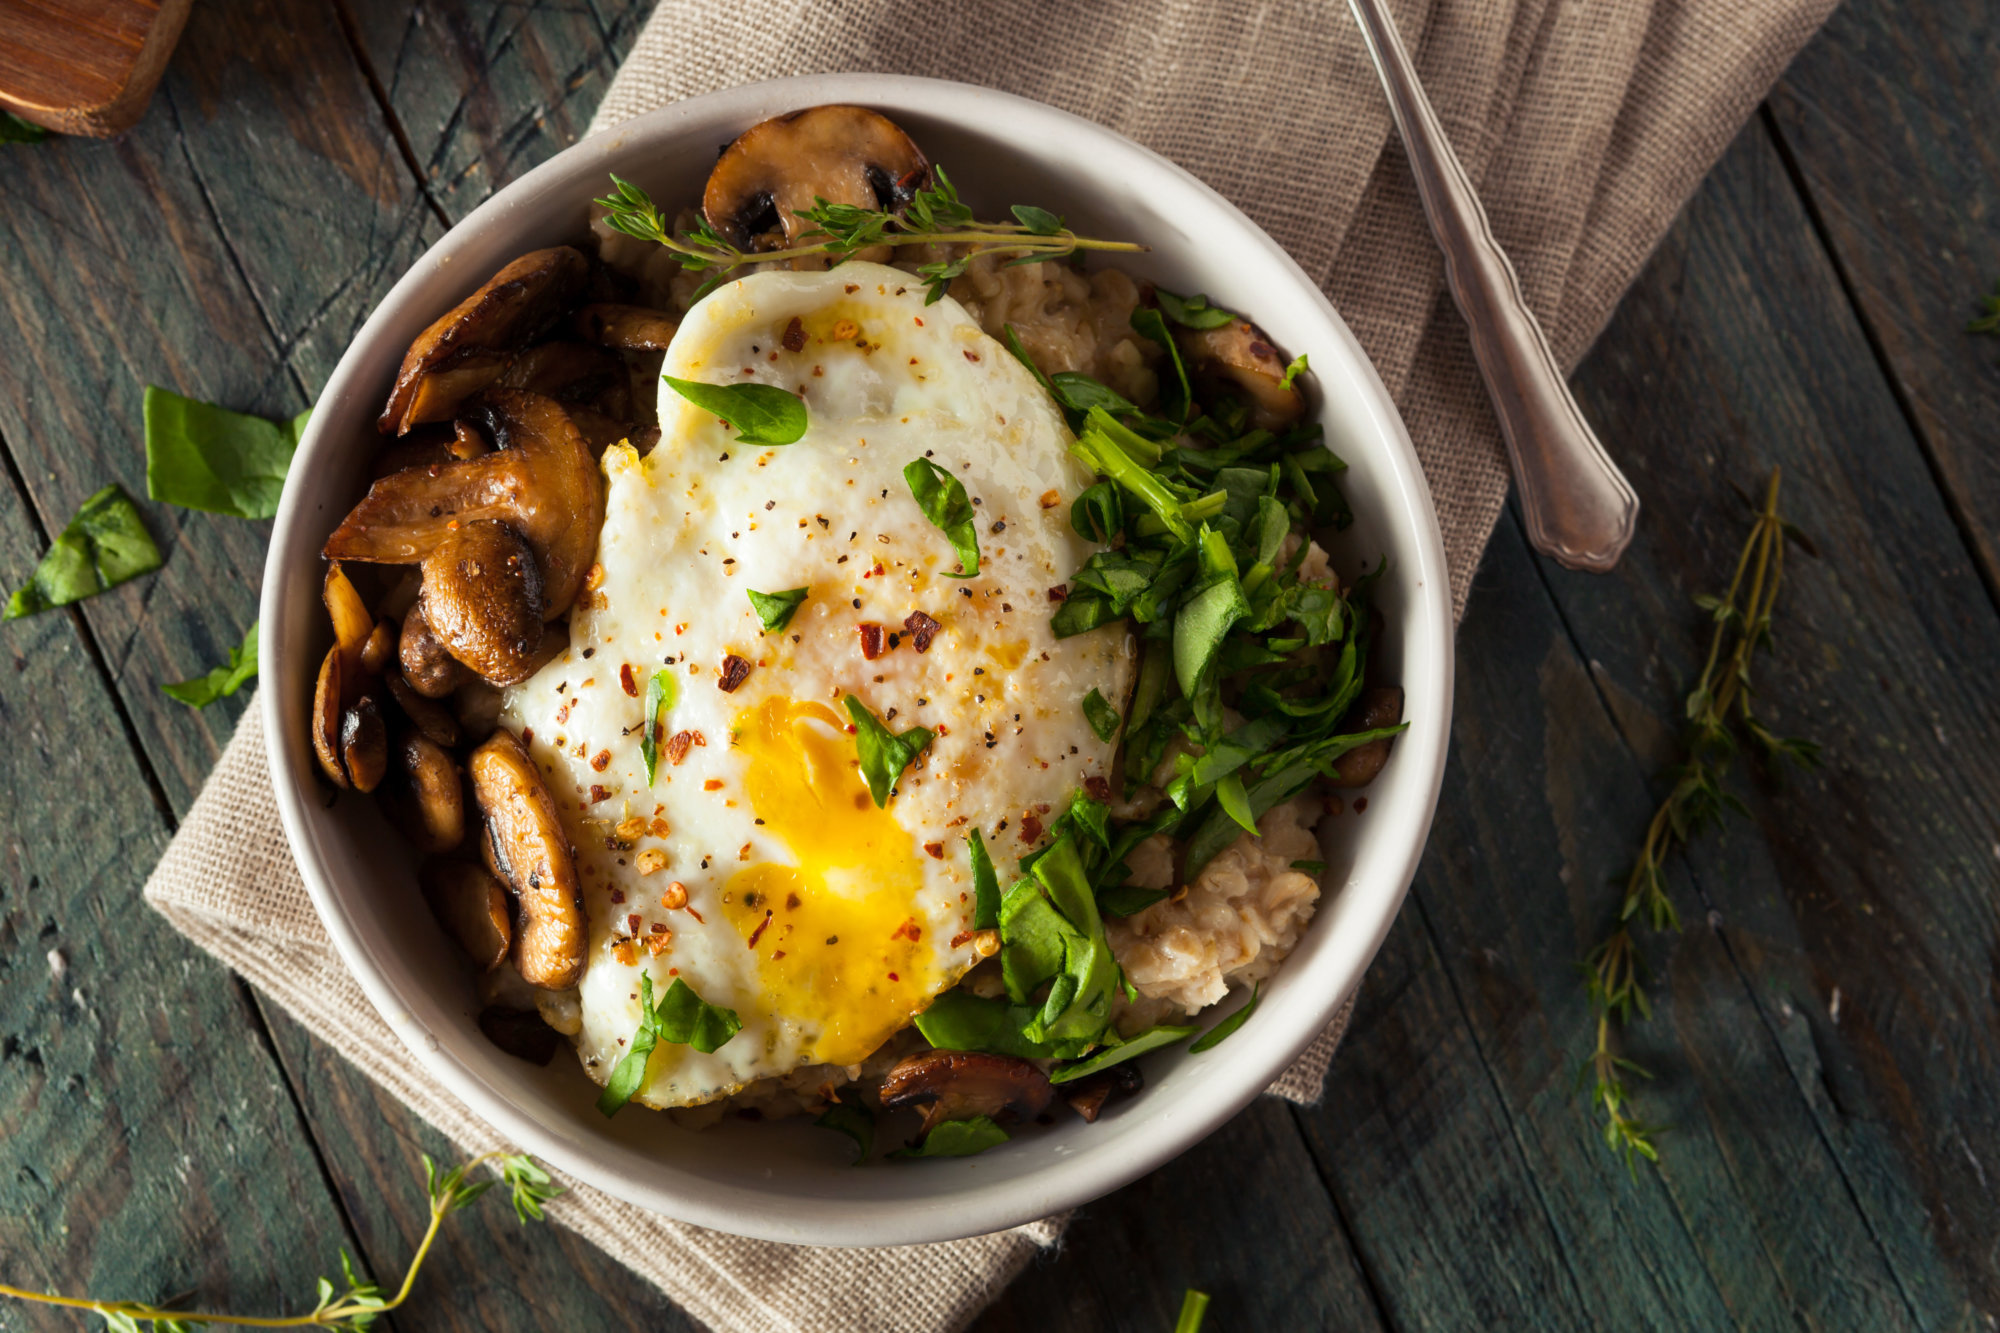 Healthy Homemade Savory Oatmeal with Eggs Mushrooms and Spinach